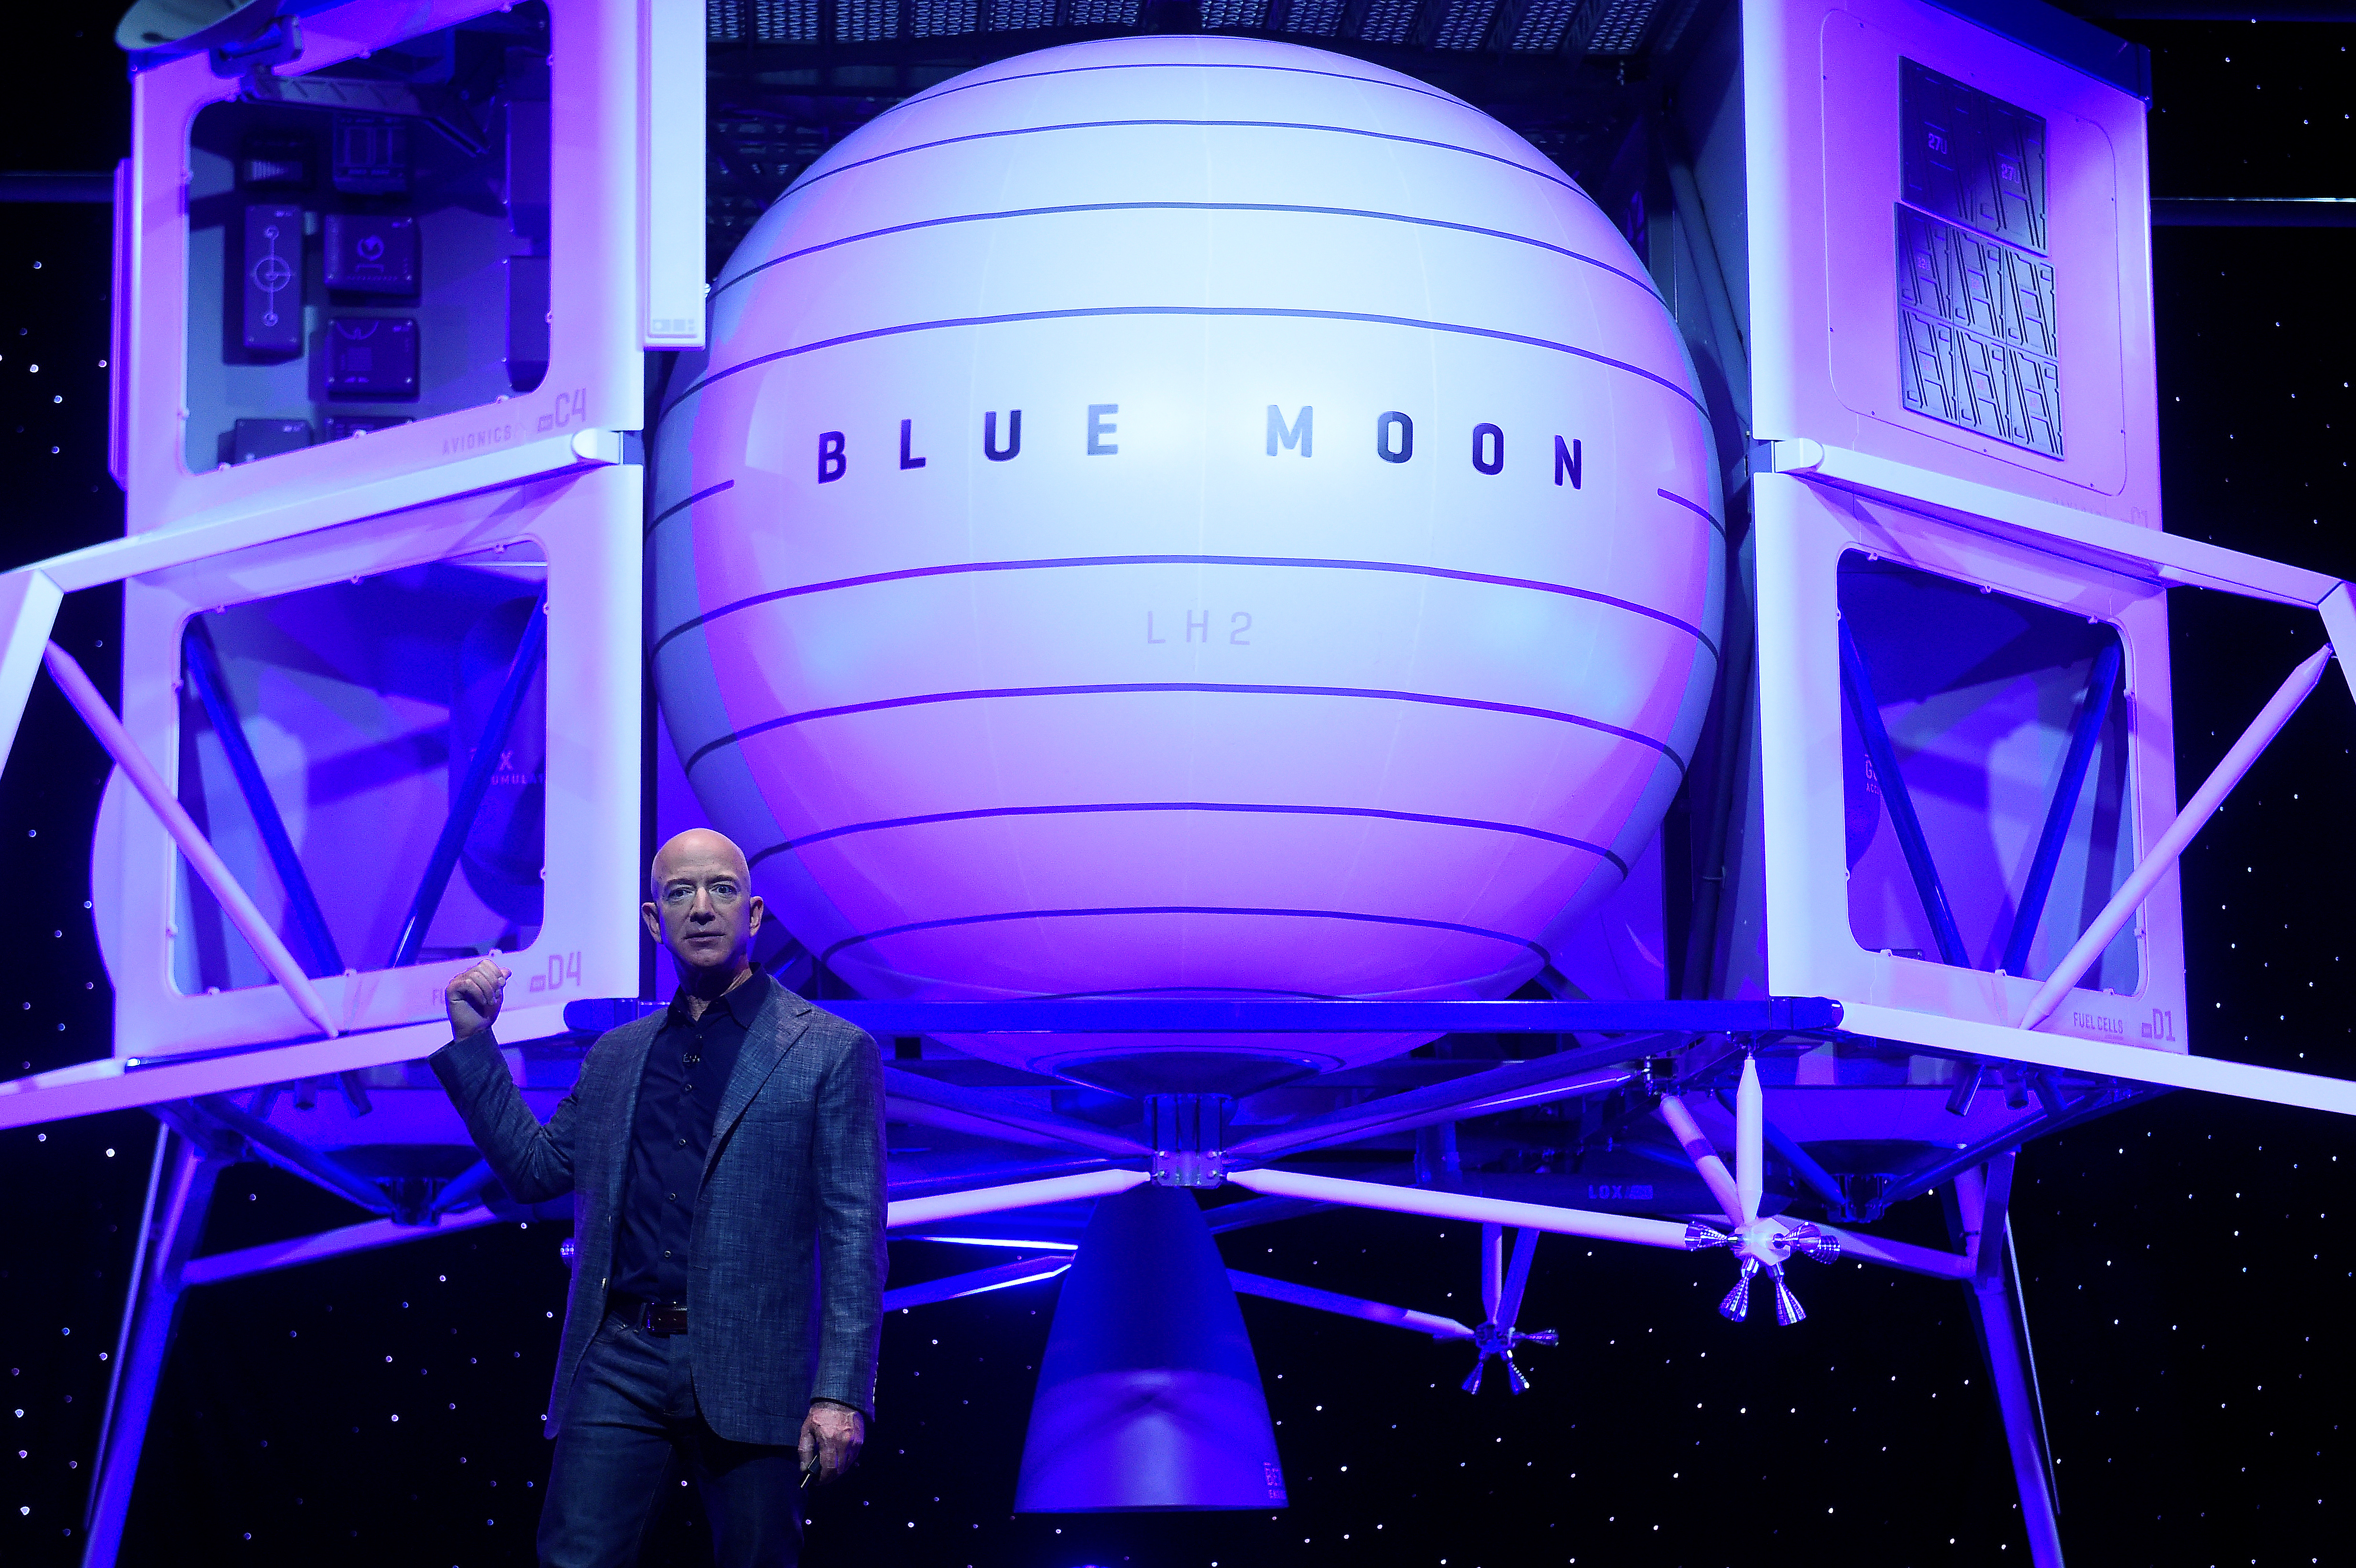 Founder, Chairman, CEO and President of Amazon Jeff Bezos unveils his space company Blue Origin's space exploration lunar lander rocket called Blue Moon during an unveiling event in Washington, U.S., May 9, 2019. REUTERS/Clodagh Kilcoyne